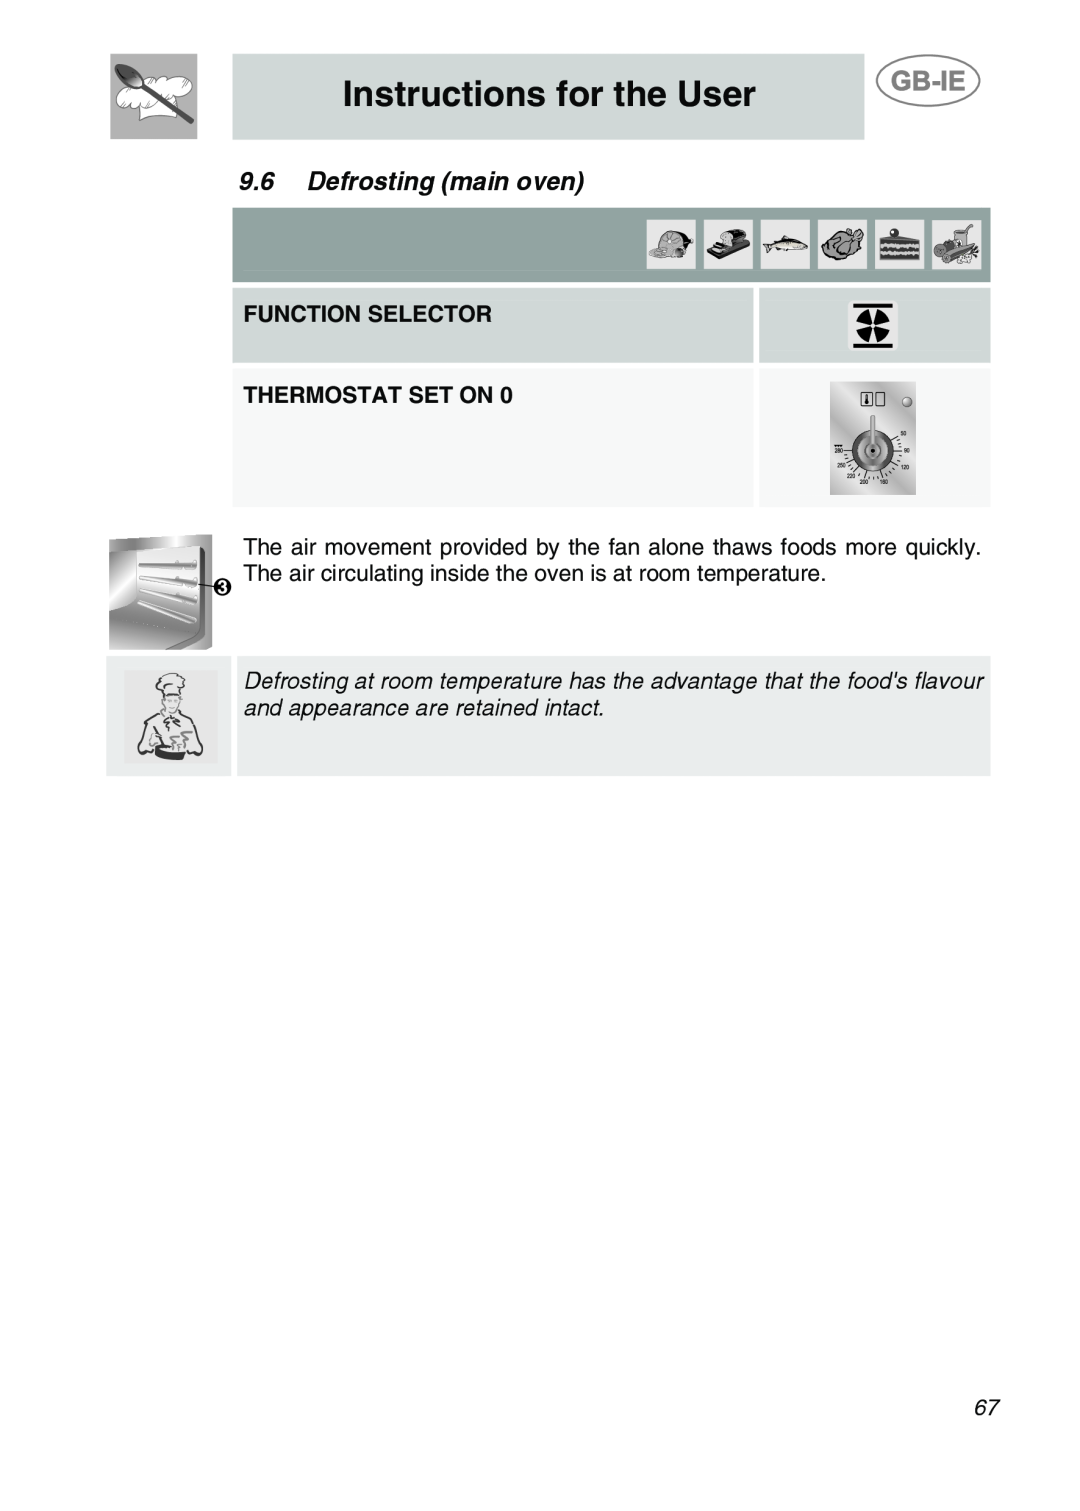 Smeg A2PY-6 manual Defrosting main oven, Instructions for the User, Function Selector Thermostat Set On 